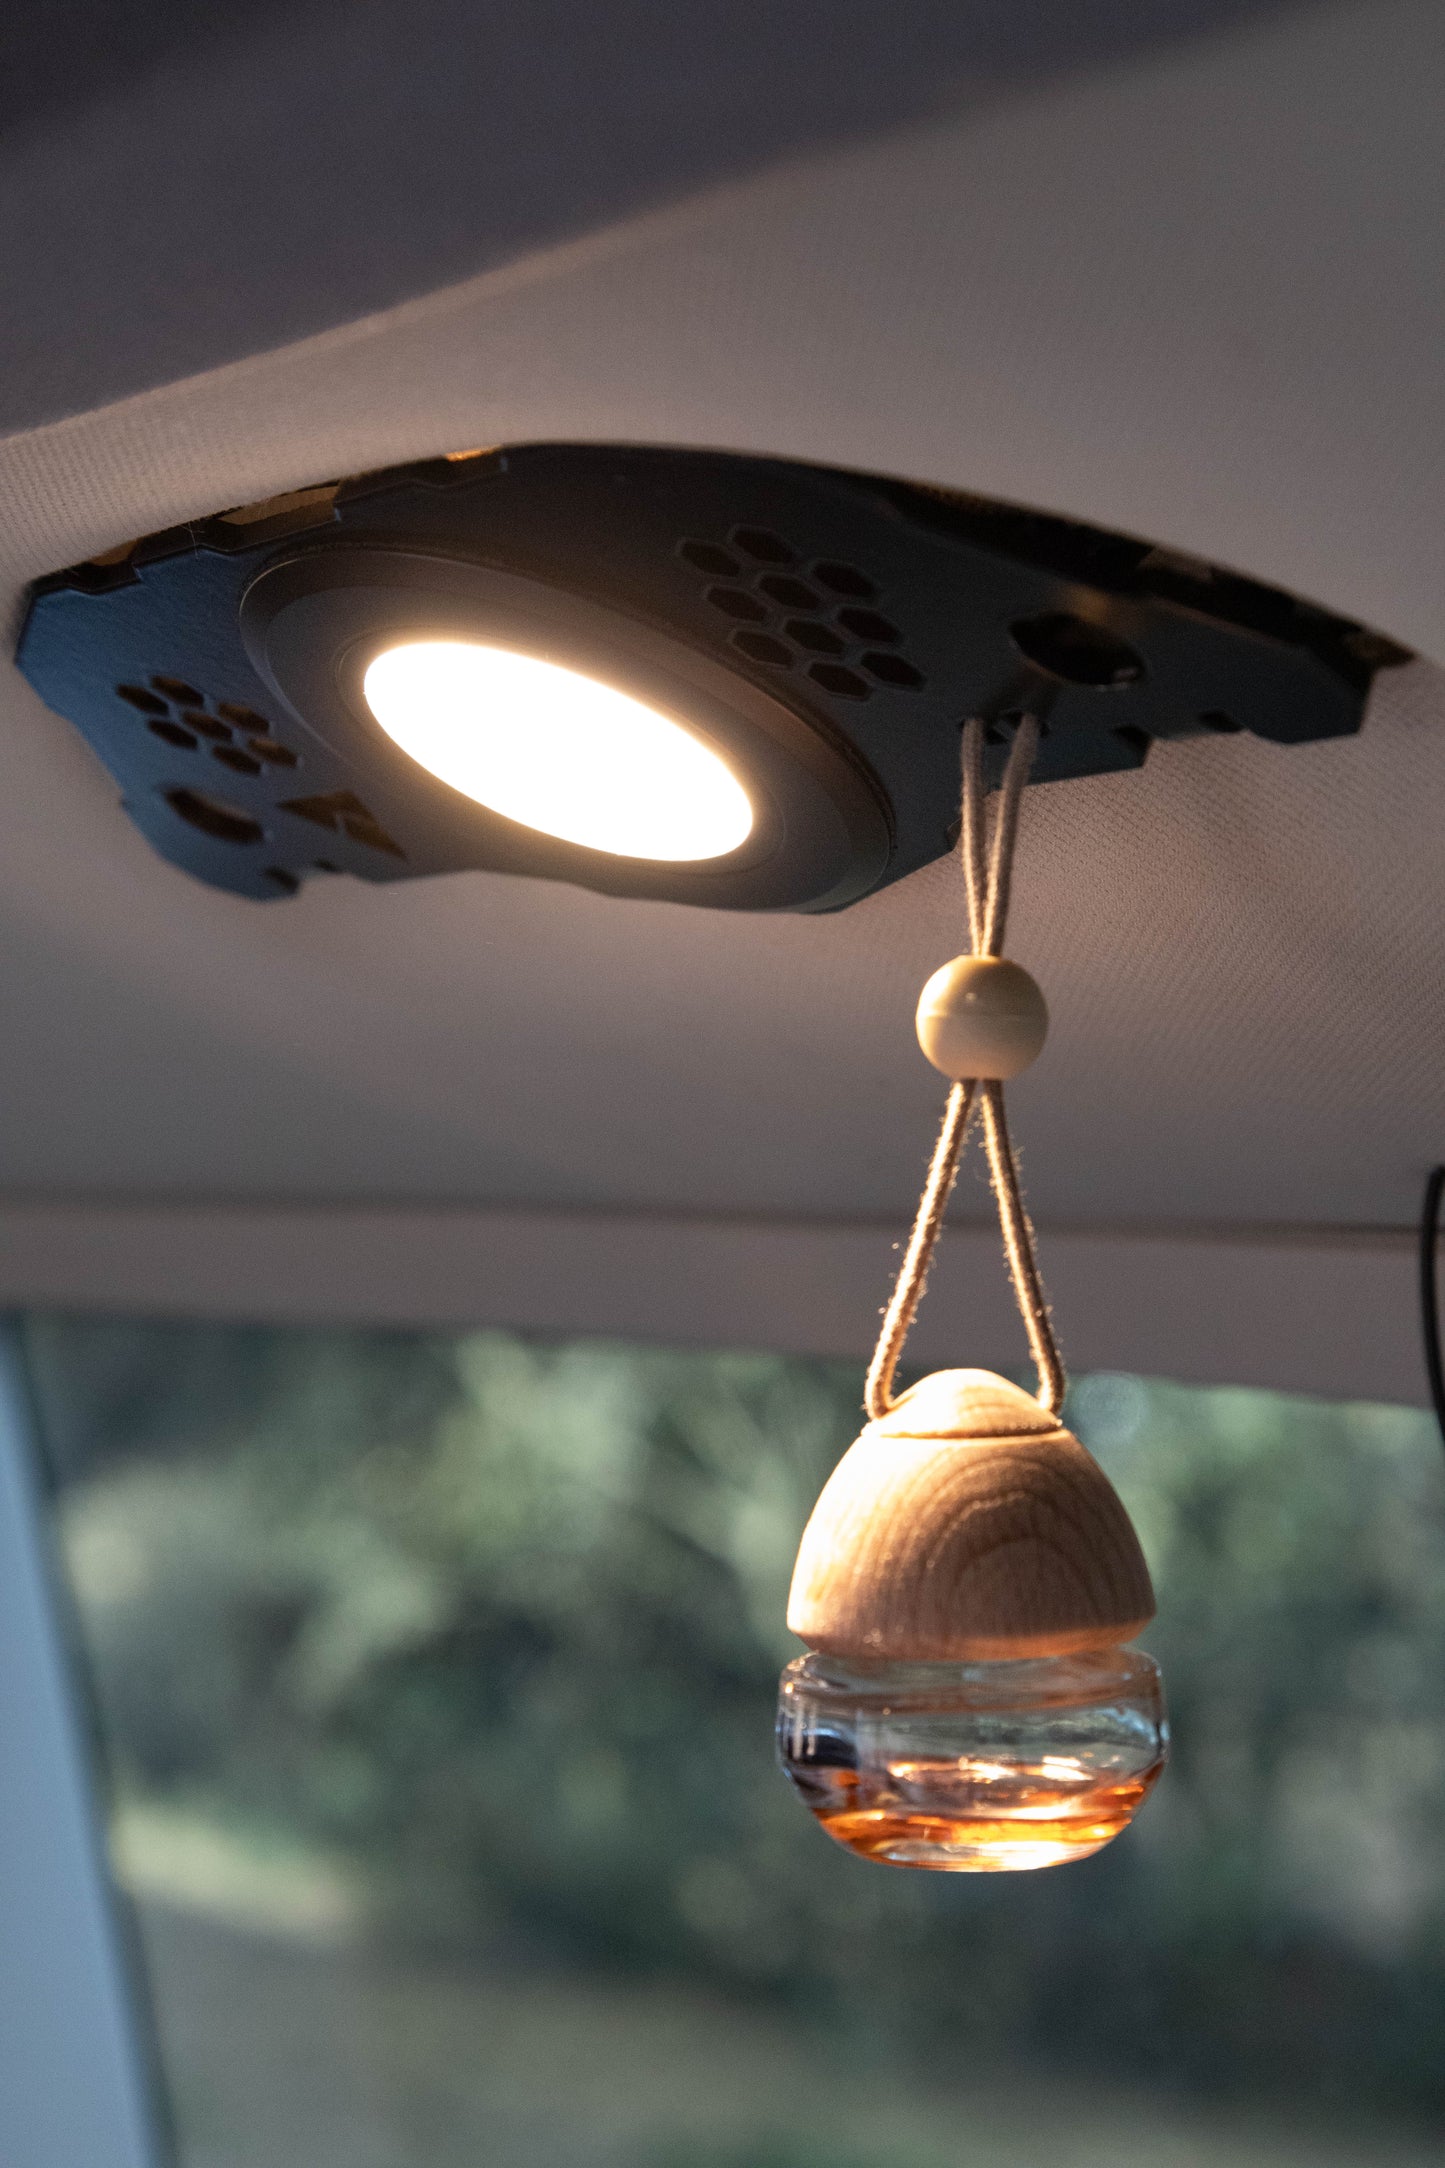 LightKarrier switched on and holding an air freshened using its mount holes.